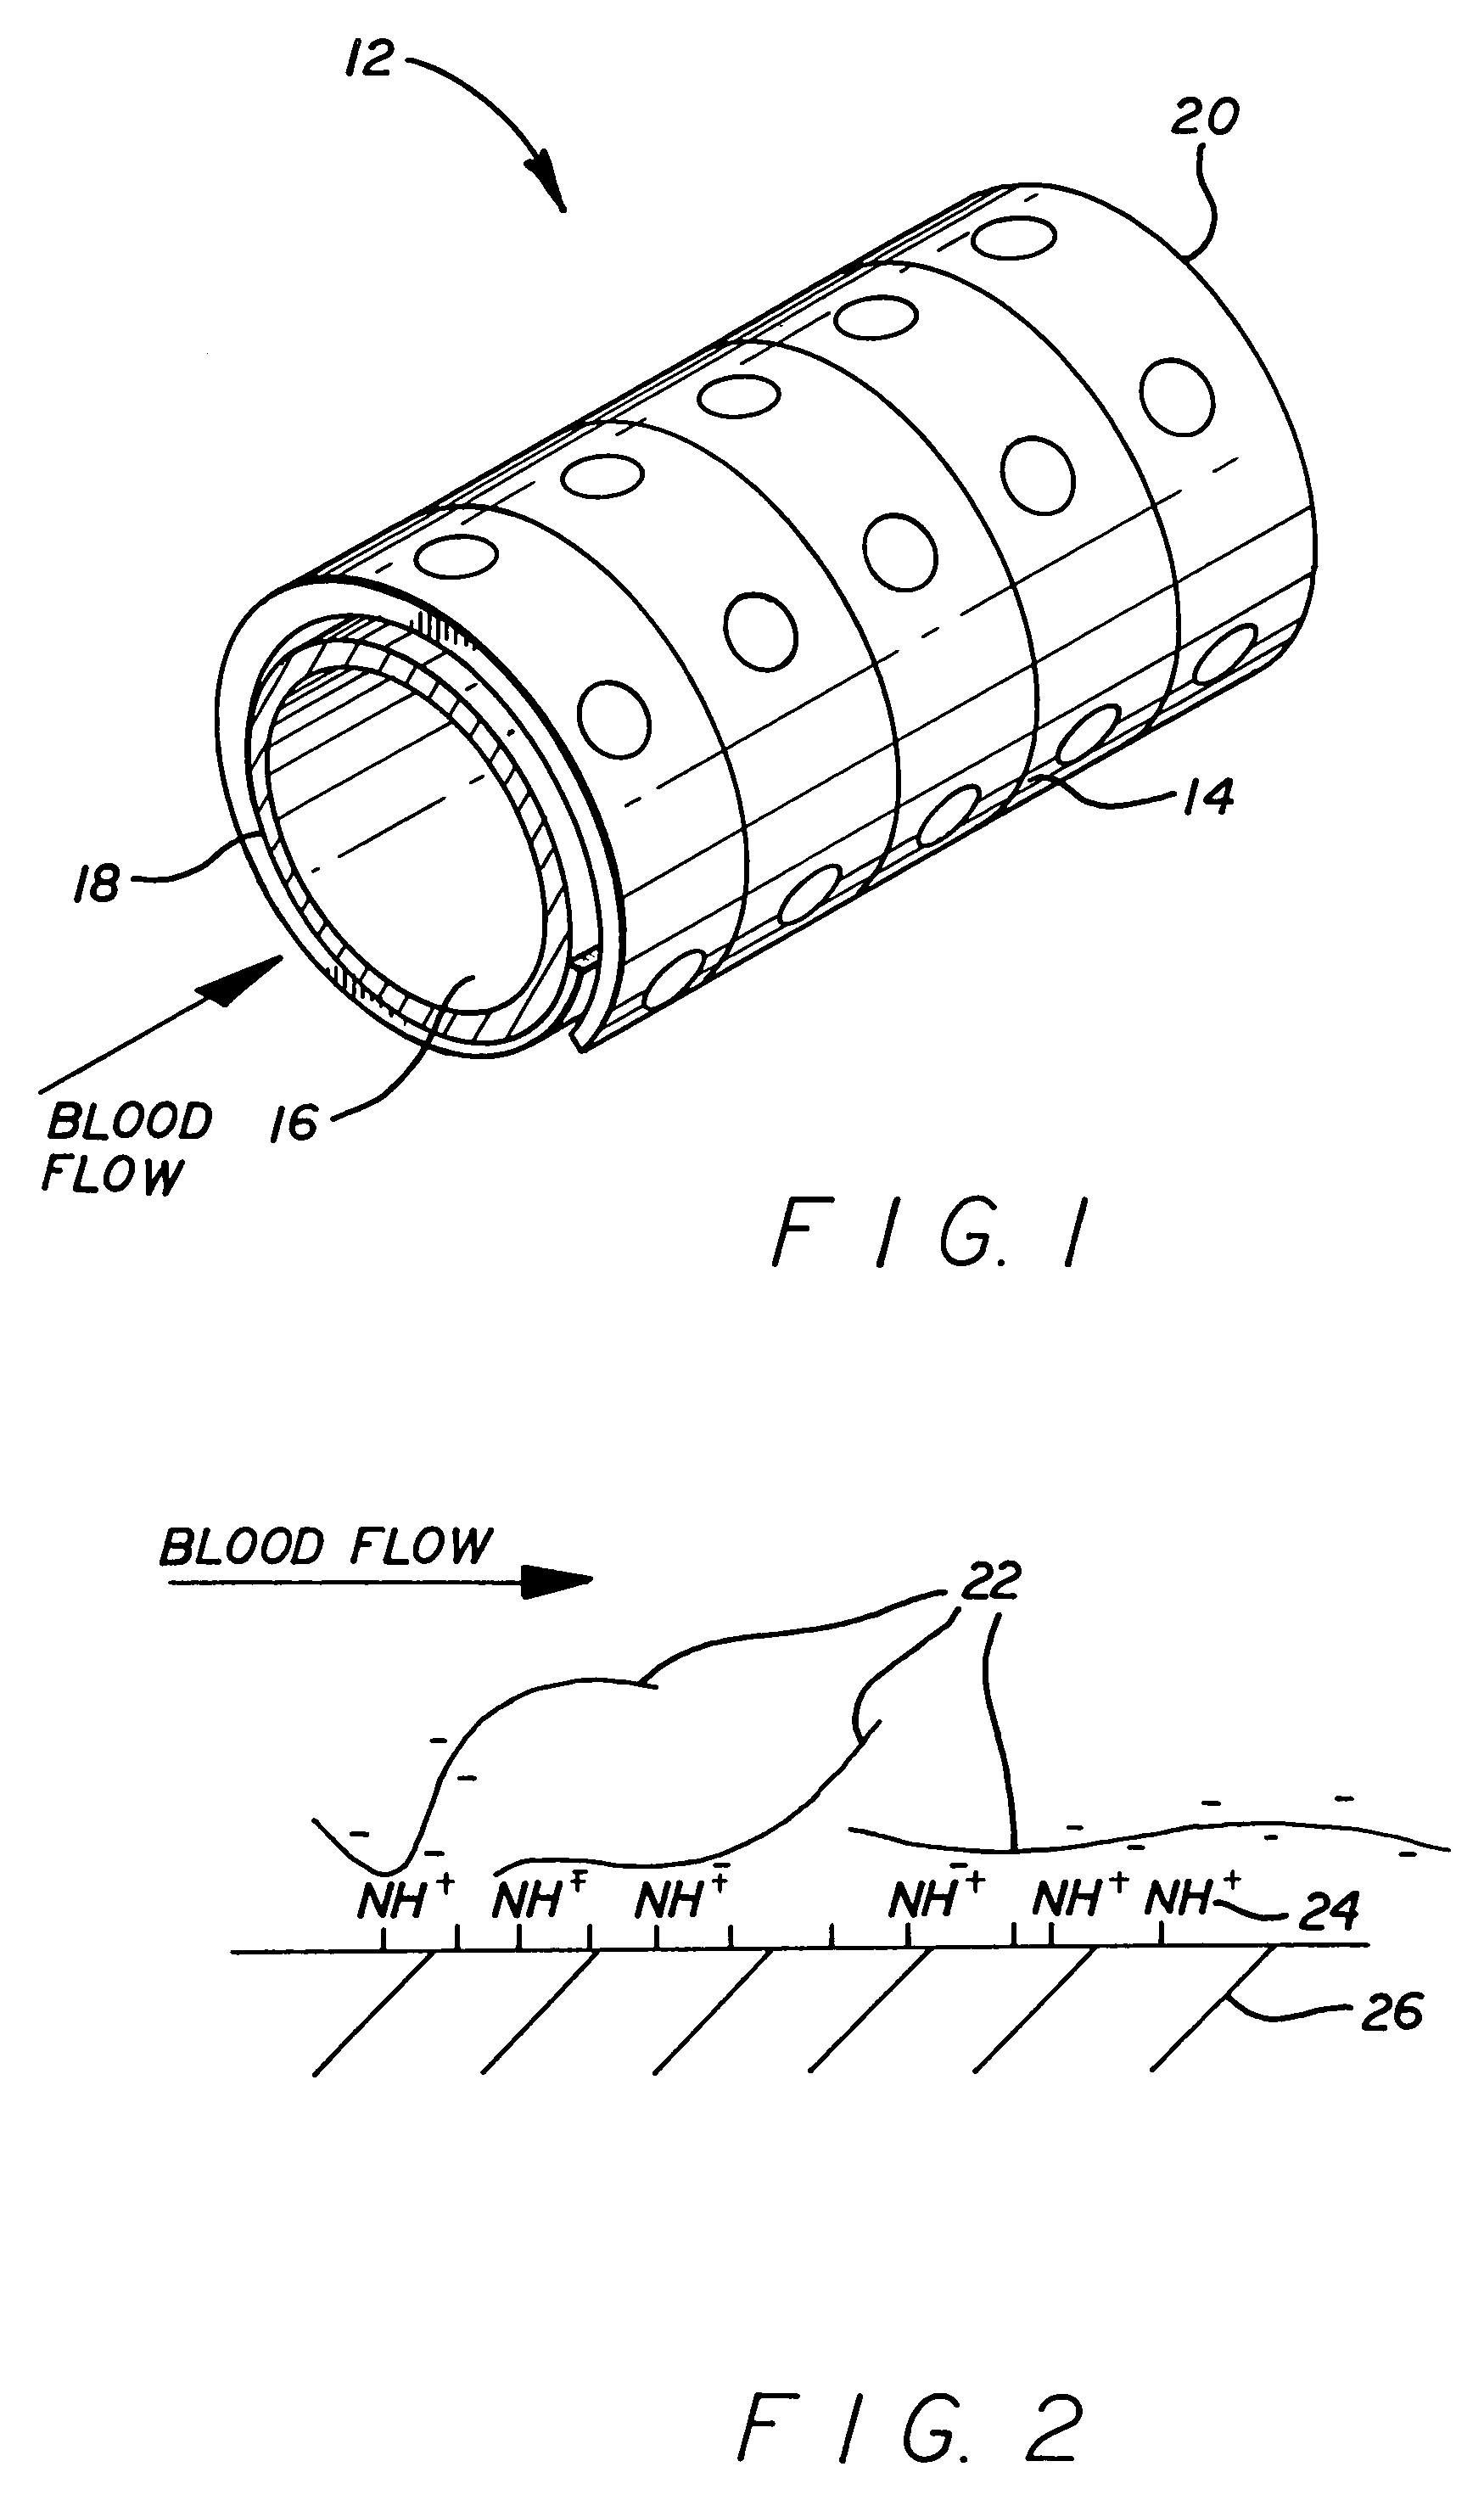 Method of reducing or eliminating thrombus formation